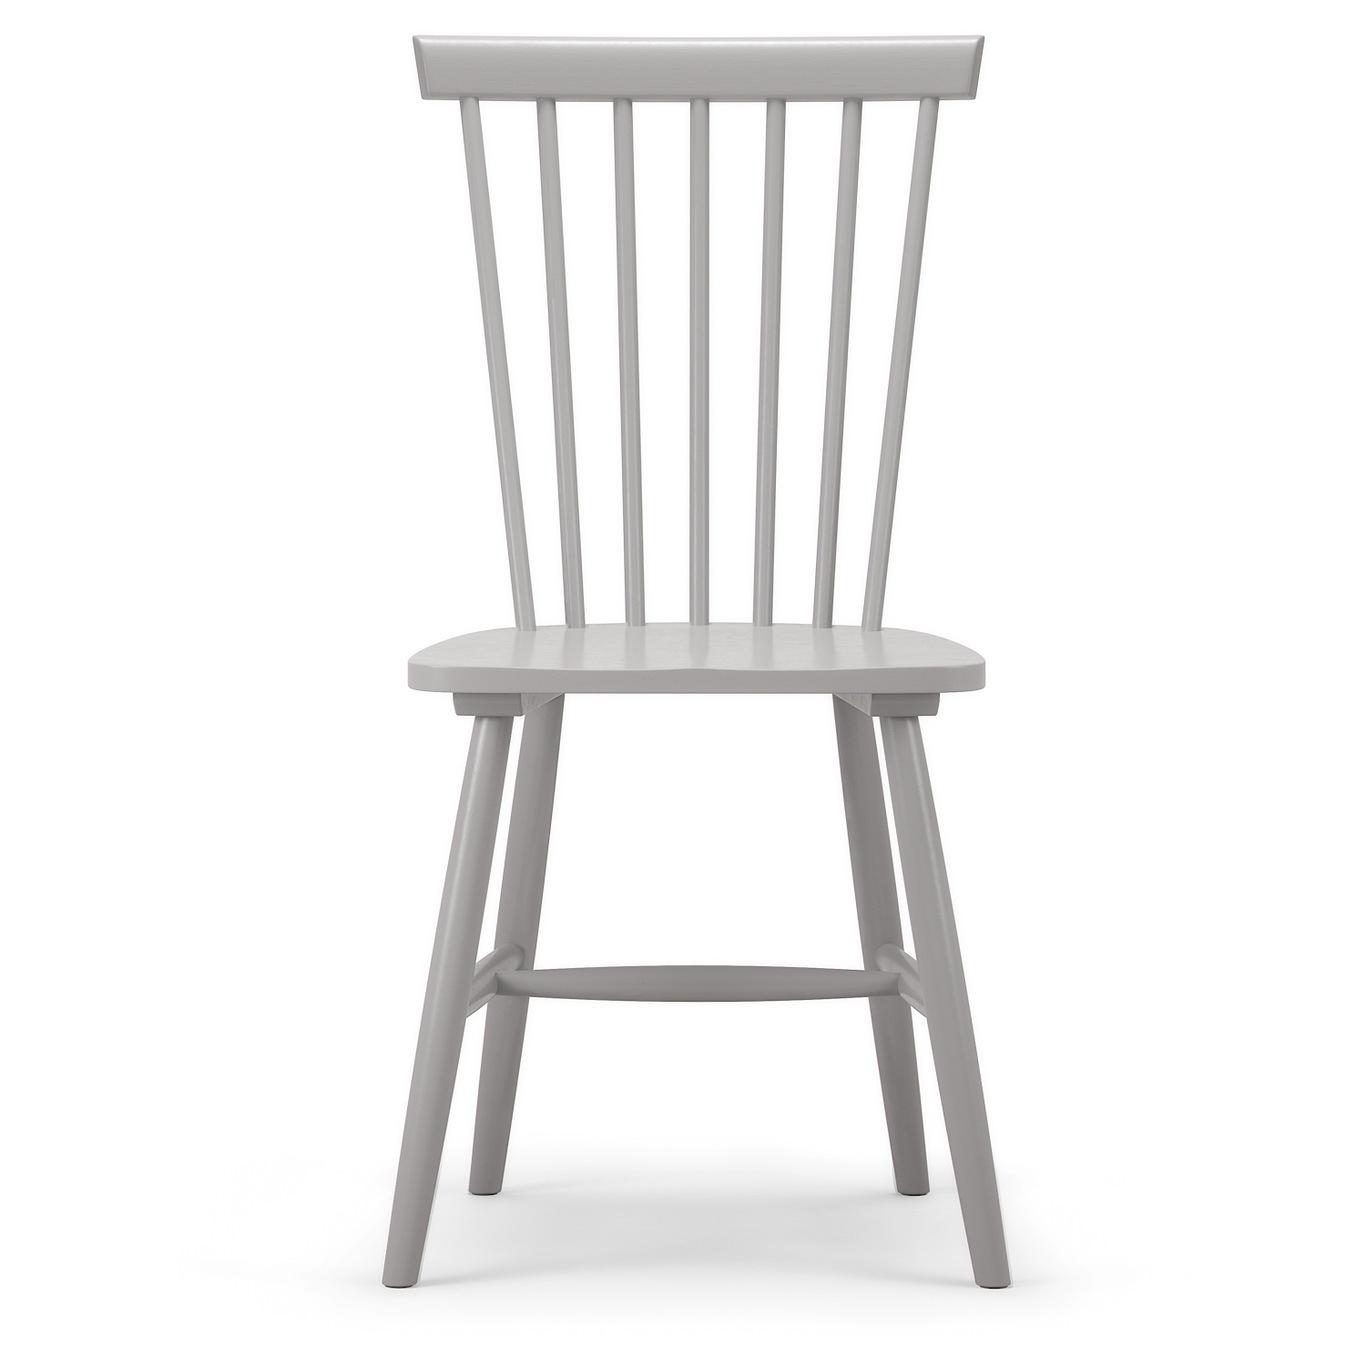 Wood H17 Windsor Chair Grey, Black Wooden Windsor Chairs